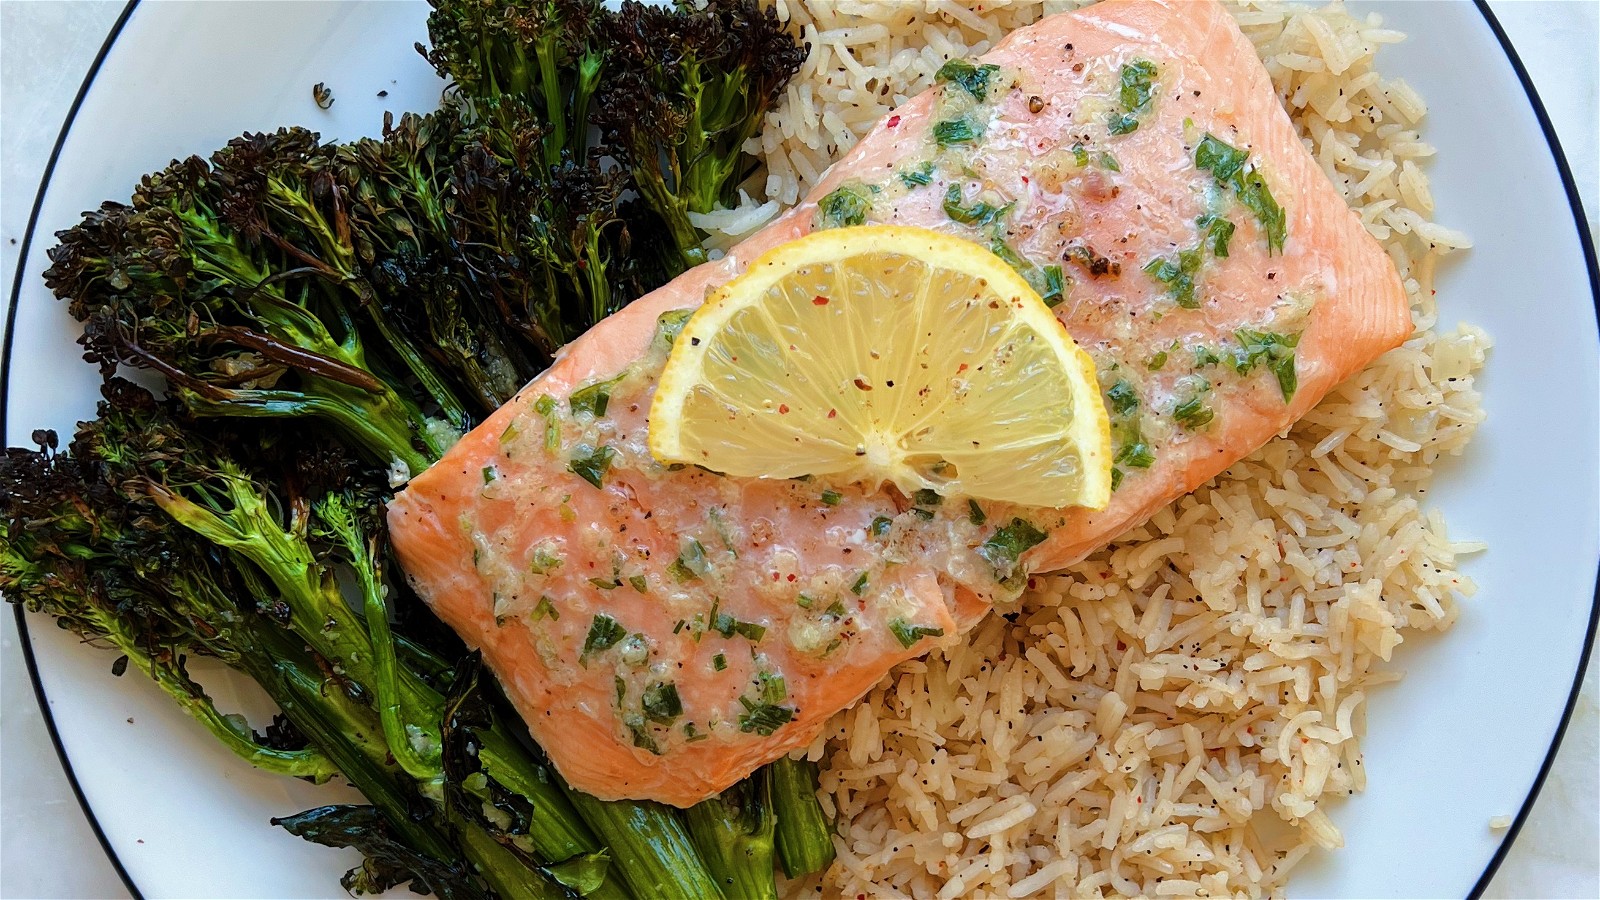 Image of Cedar Plank King Salmon with Broccolini and Rice Pilaf